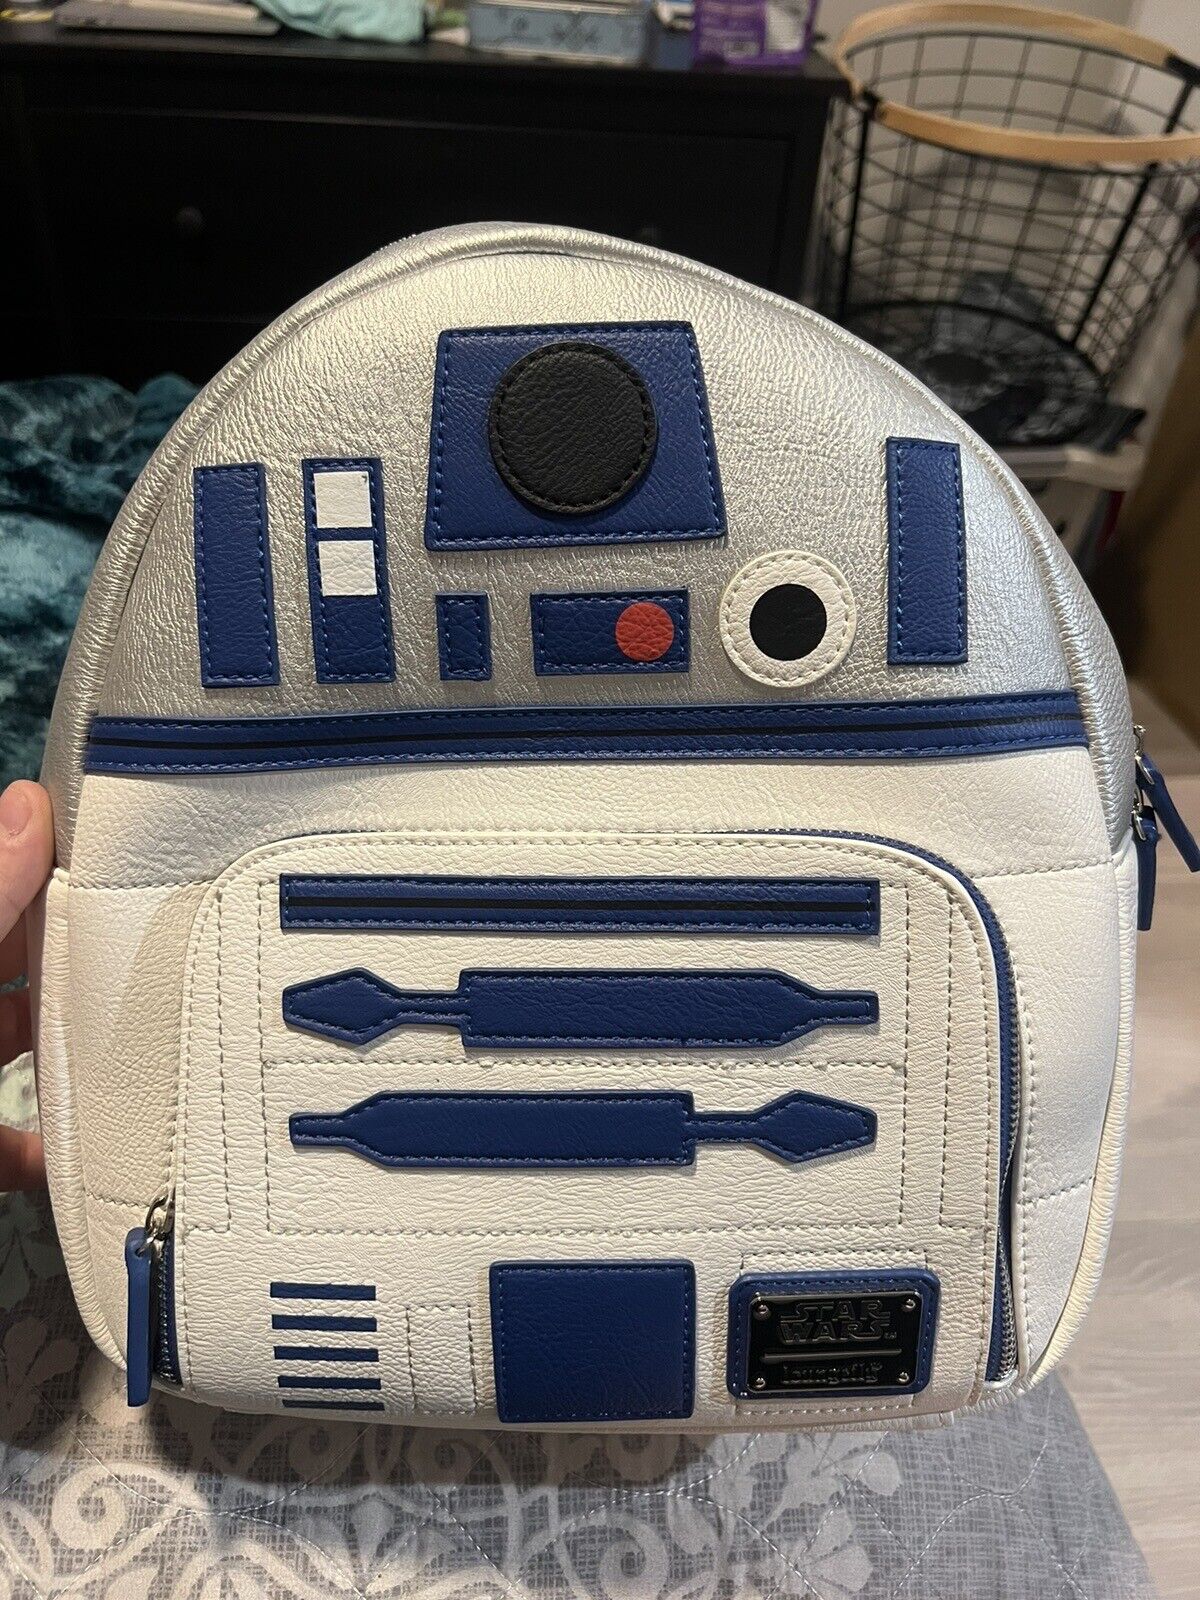 Authentic R2D2 Disney Loungefly